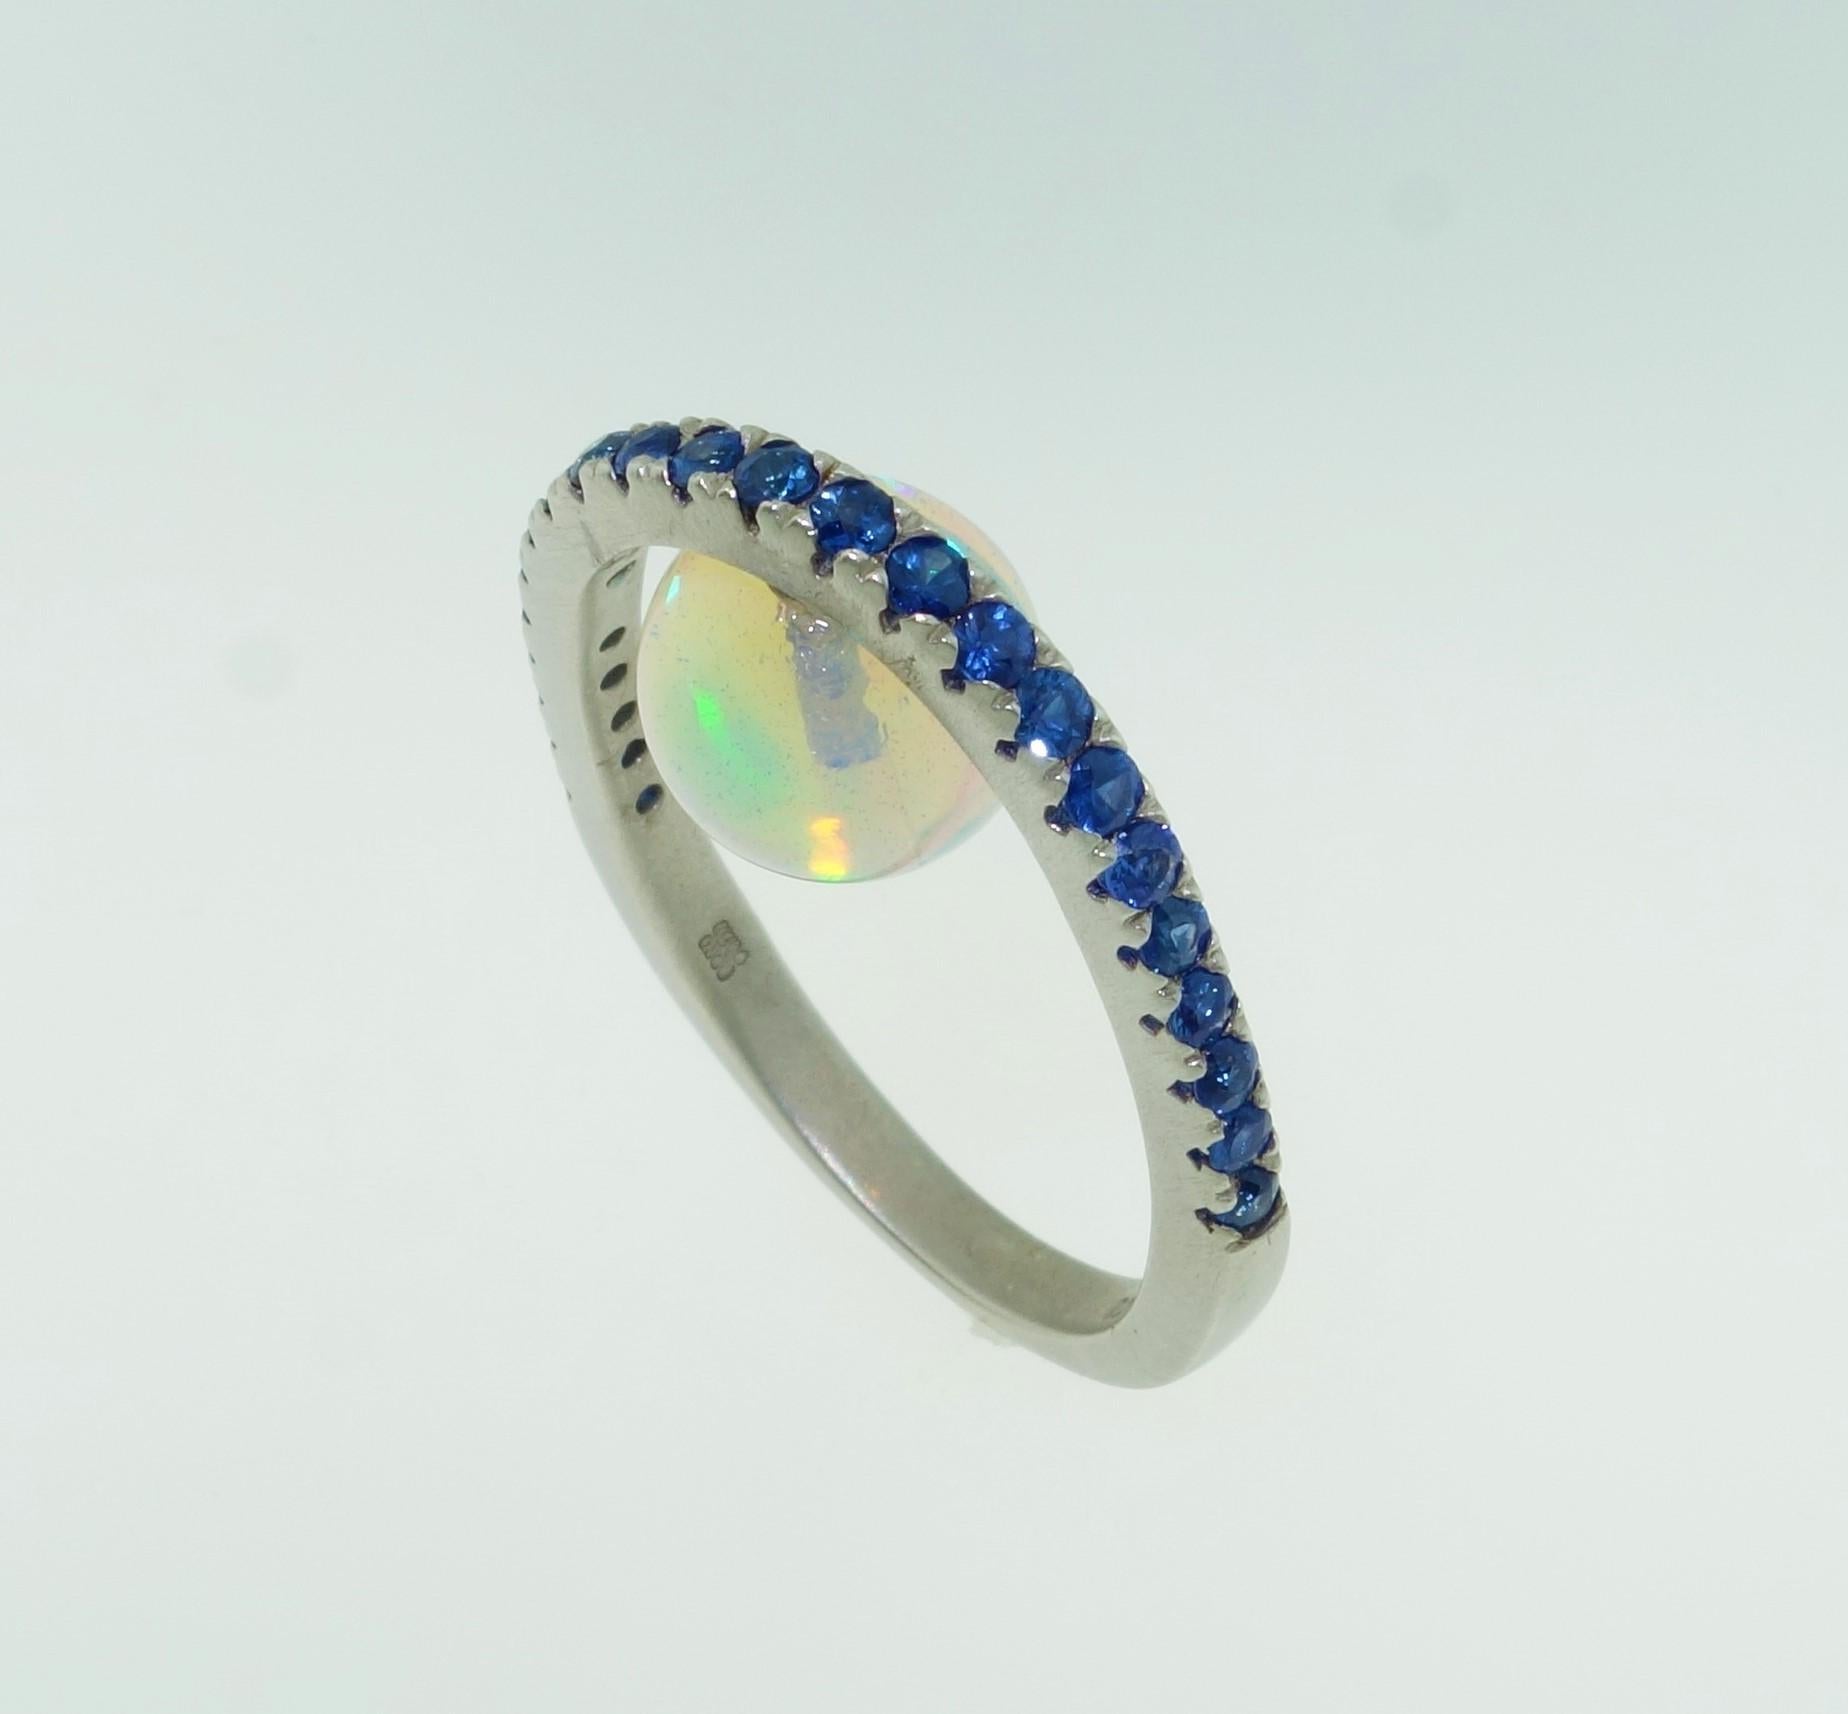 Contemporary 3.63 Carat Opal and Blue Sapphire Statement Ring Estate Fine Jewelry For Sale